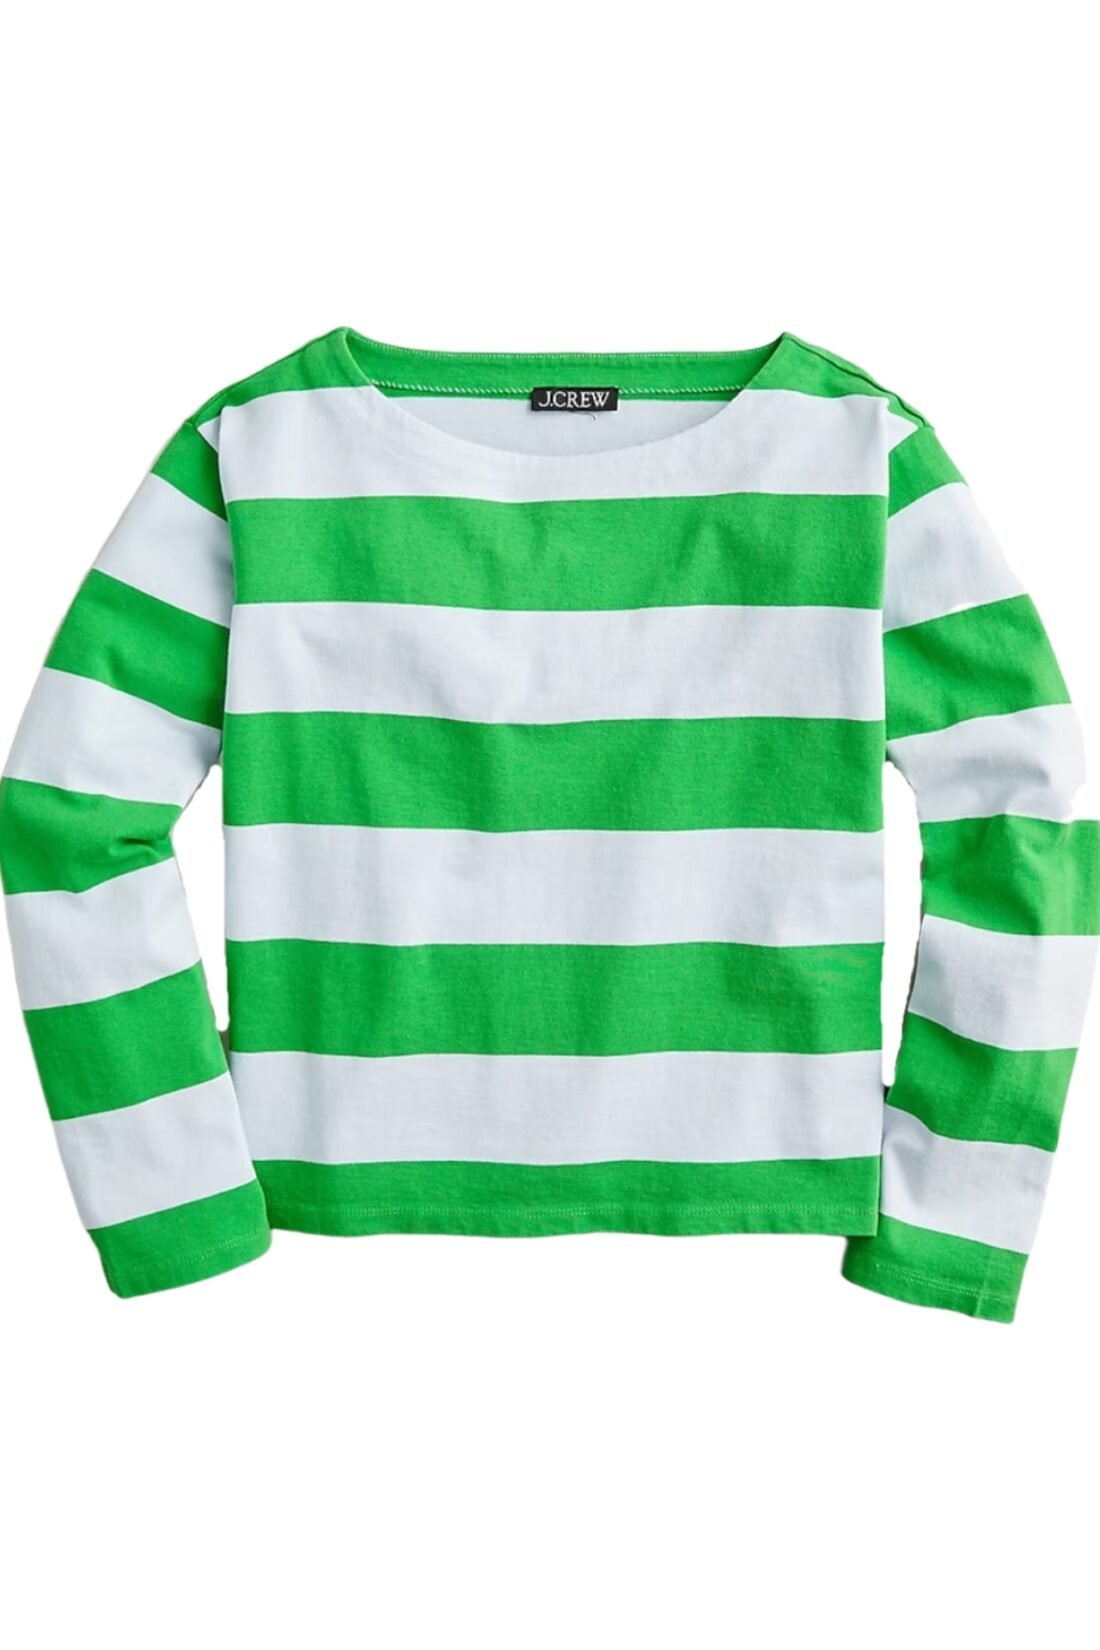 Green Striped Boatneck Tee